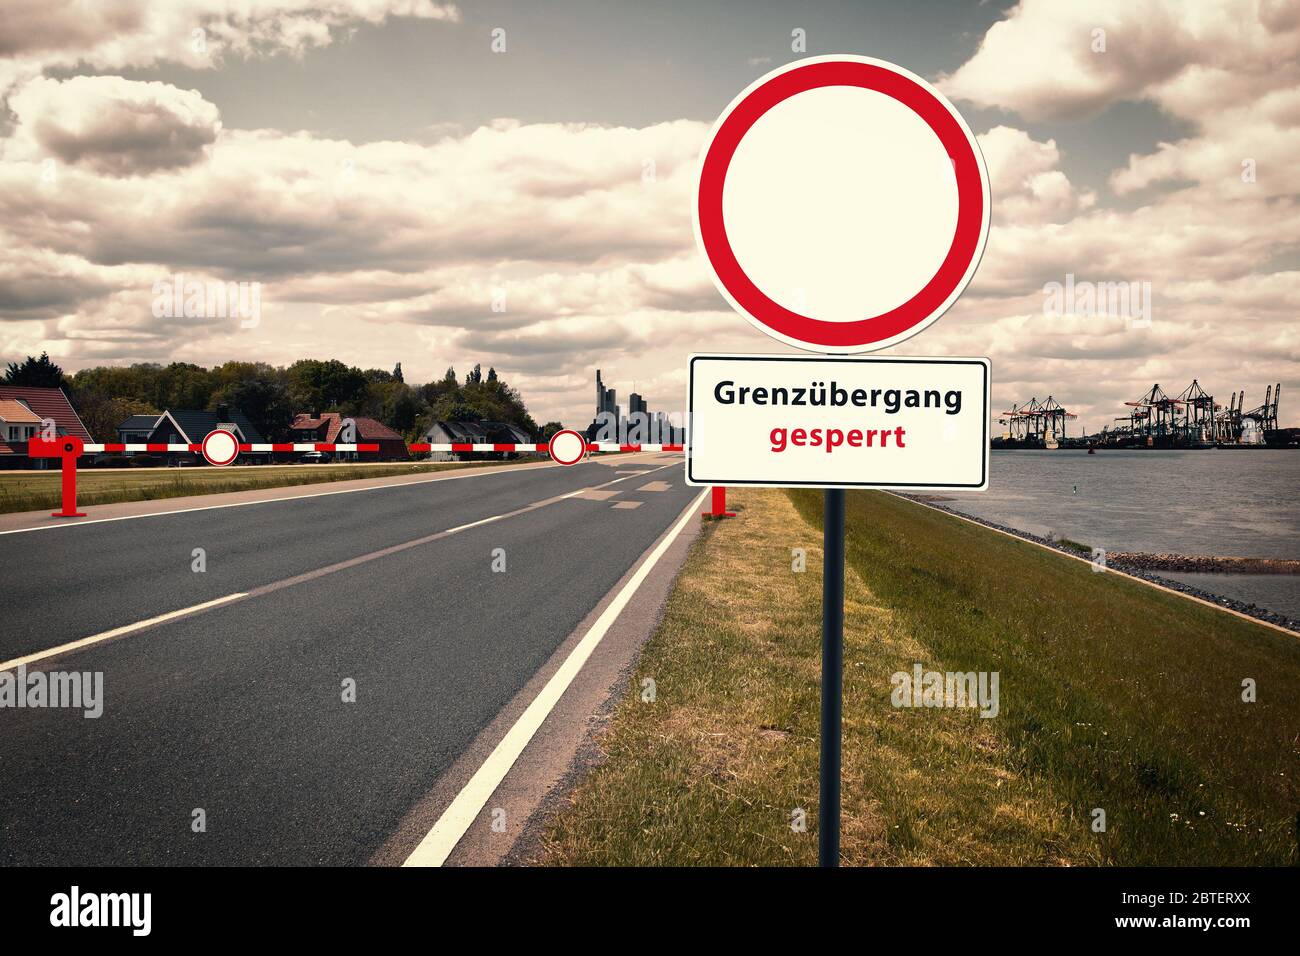 Border crossing in front of a container port, in the background a city silhouette. The inscription of the traffic sign: 'Grenzübergang gesperrt'. Traf Stock Photo